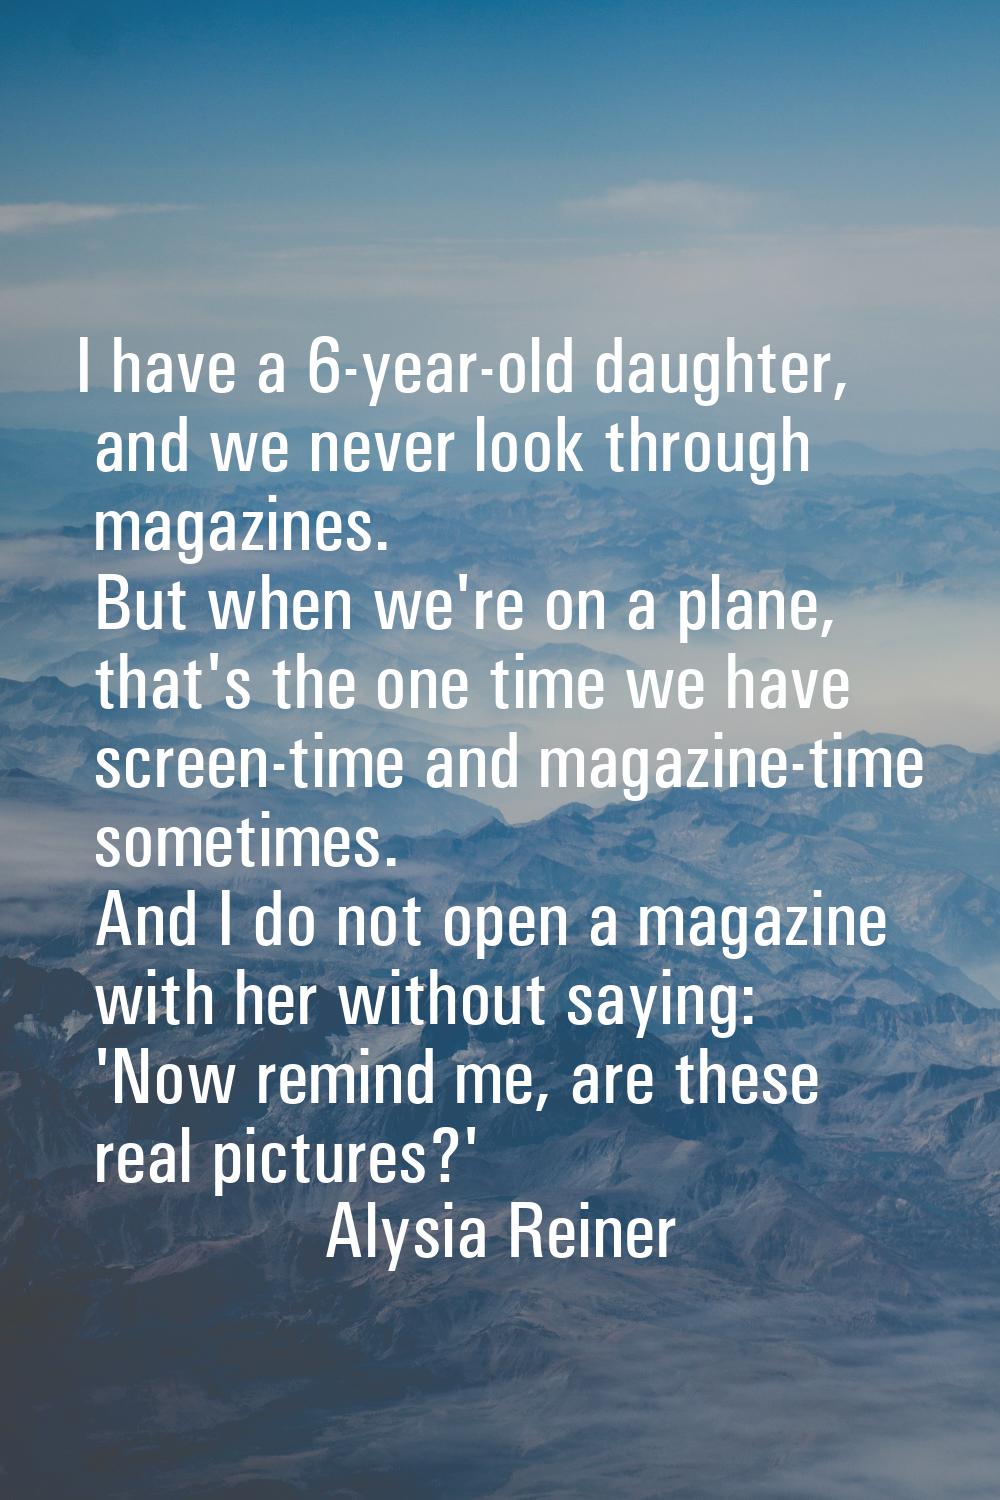 I have a 6-year-old daughter, and we never look through magazines. But when we're on a plane, that'